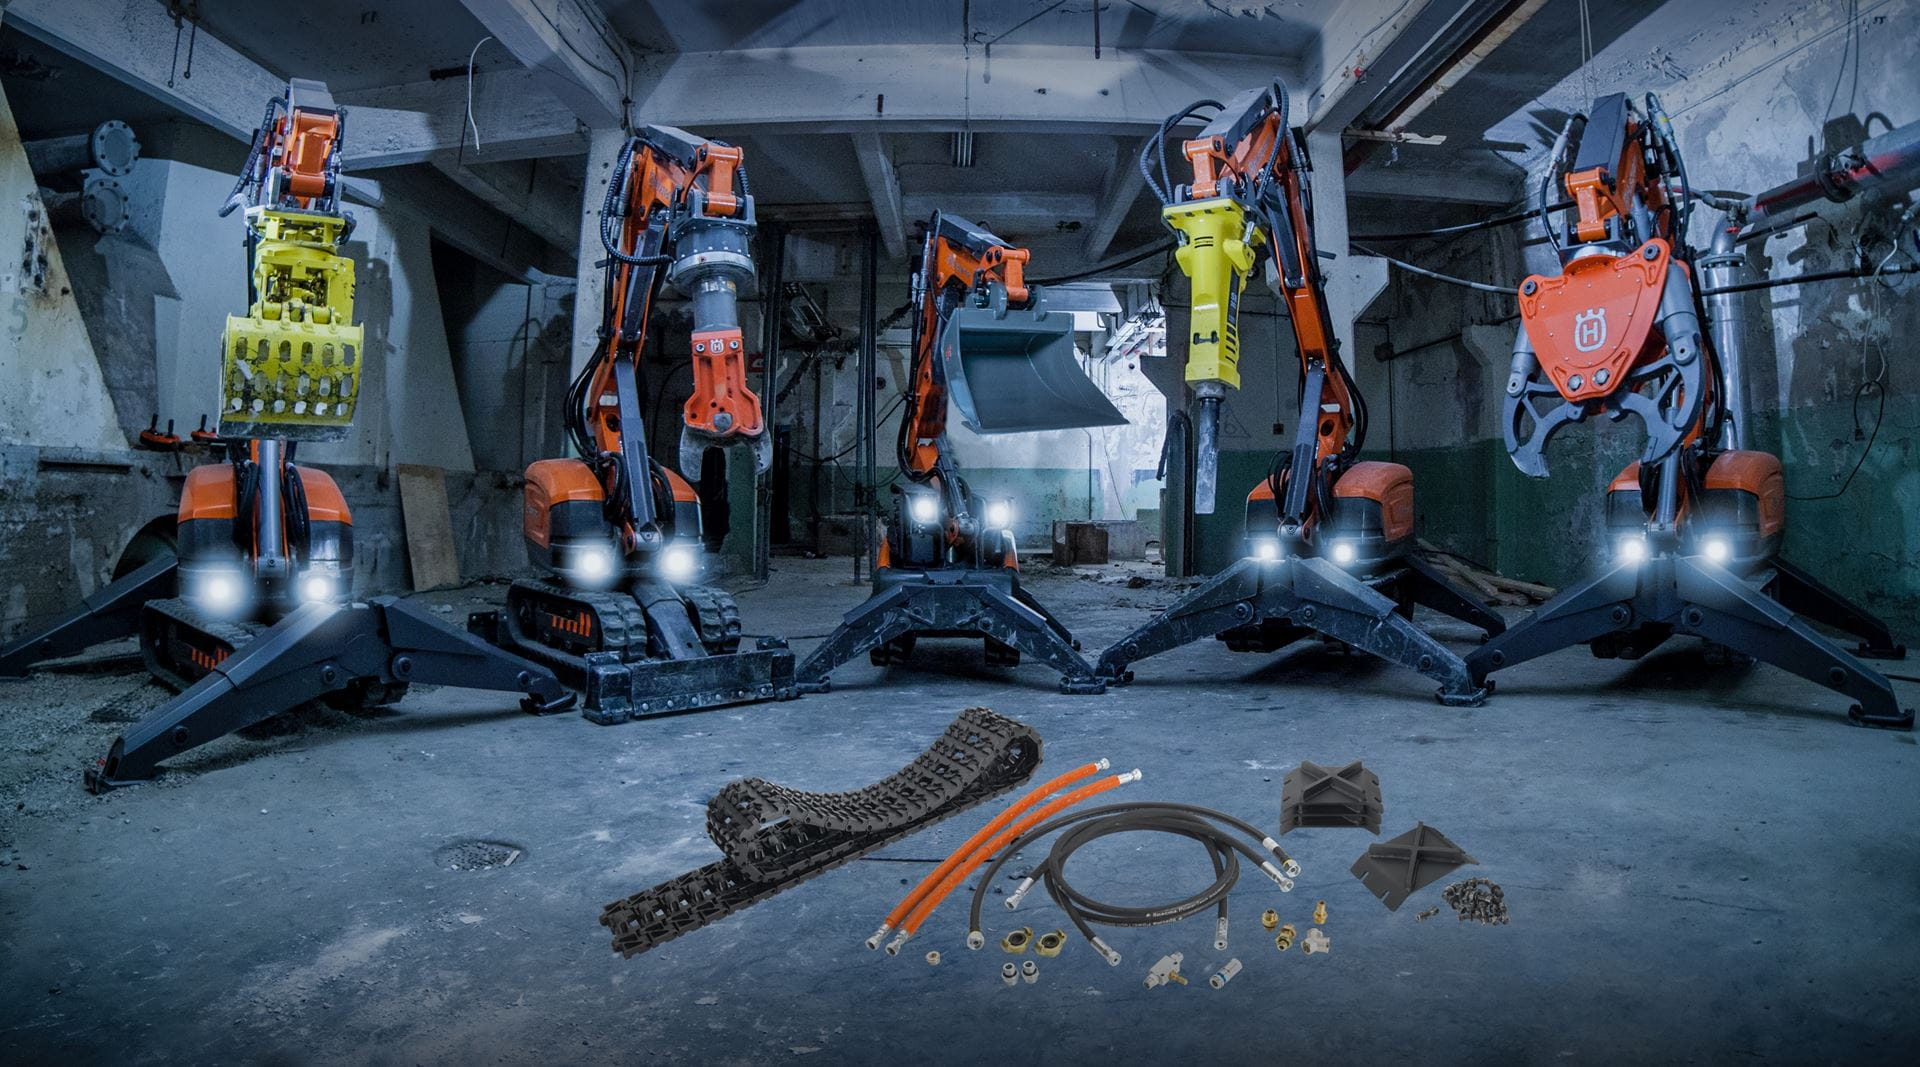 Remote demolition robots from Husqvarna equipped with interchangeable tools for great utility.